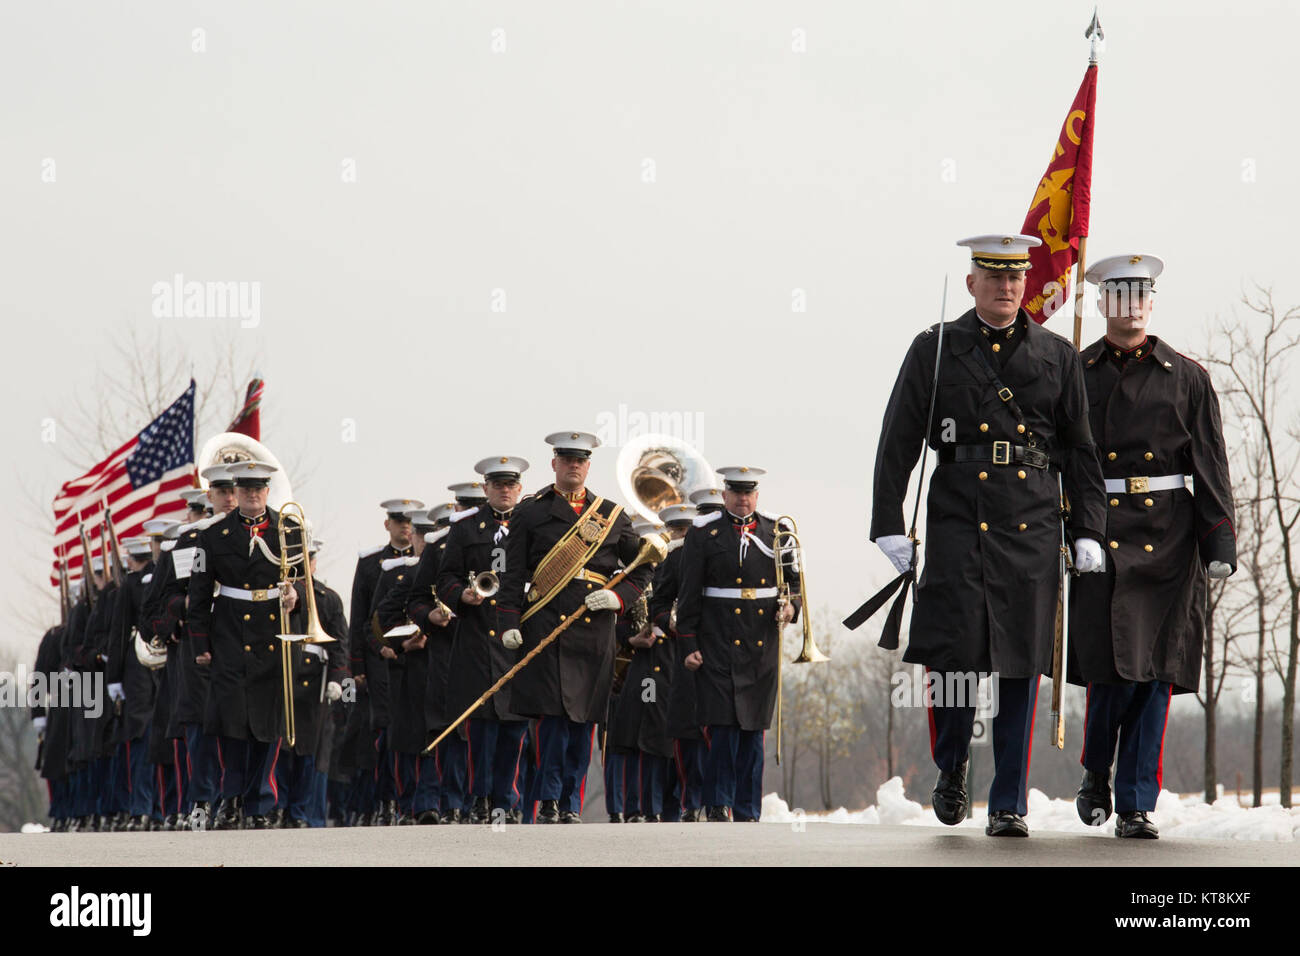 Col. Christian G. Cabaniss, commanding officer of Marine Barracks Washington, D.C., 'The President's Own' U.S. Marine Band and Barracks' ceremonial marchers march toward the gravesite of retired Col. Charles H. Waterhouse and his wife Barbara at Arlington National Cemetery, Feb. 19, 2014. Waterhouse and his wife were laid to rest 69 years to the day after he landed on Iwo Jima during World War II. Waterhouse originally left the Corps in 1946, but accepted a special commission as a major in the reserves in 1972 as the Marine Corps' first and only artist-in-residence. He painted more than 160 wo Stock Photo